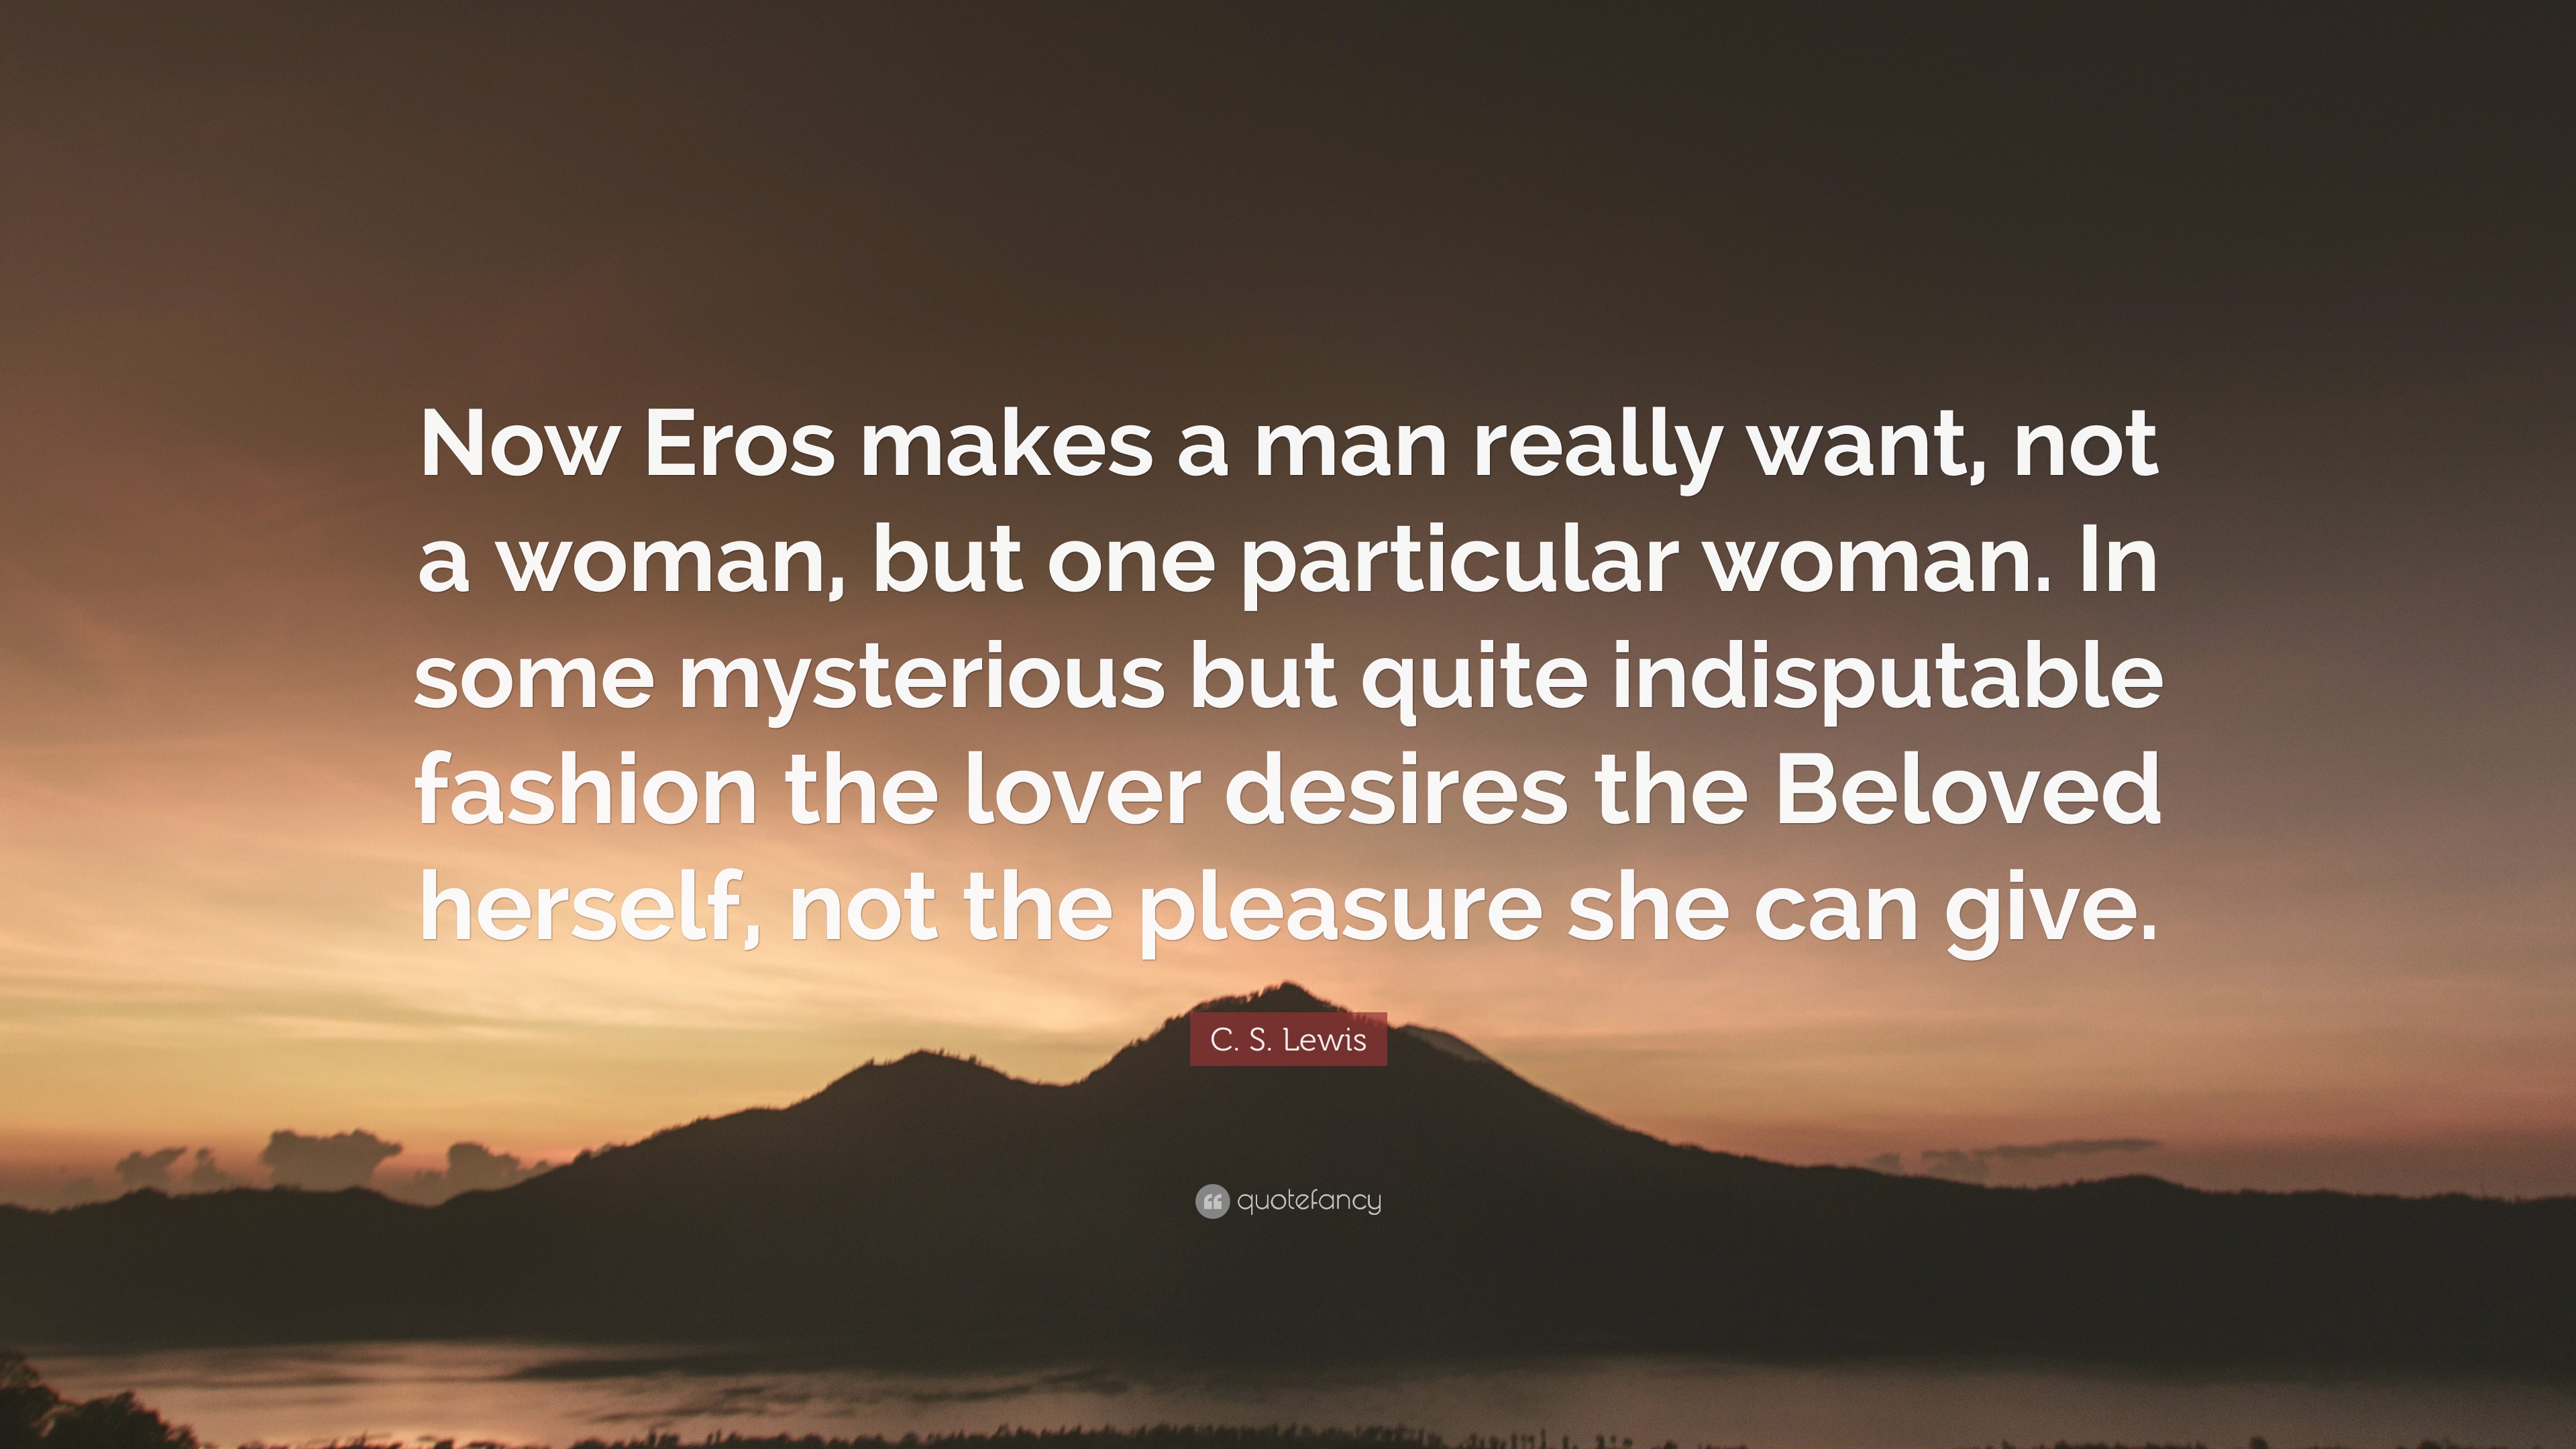 C S Lewis Quote “Now Eros makes a man really want not a woman